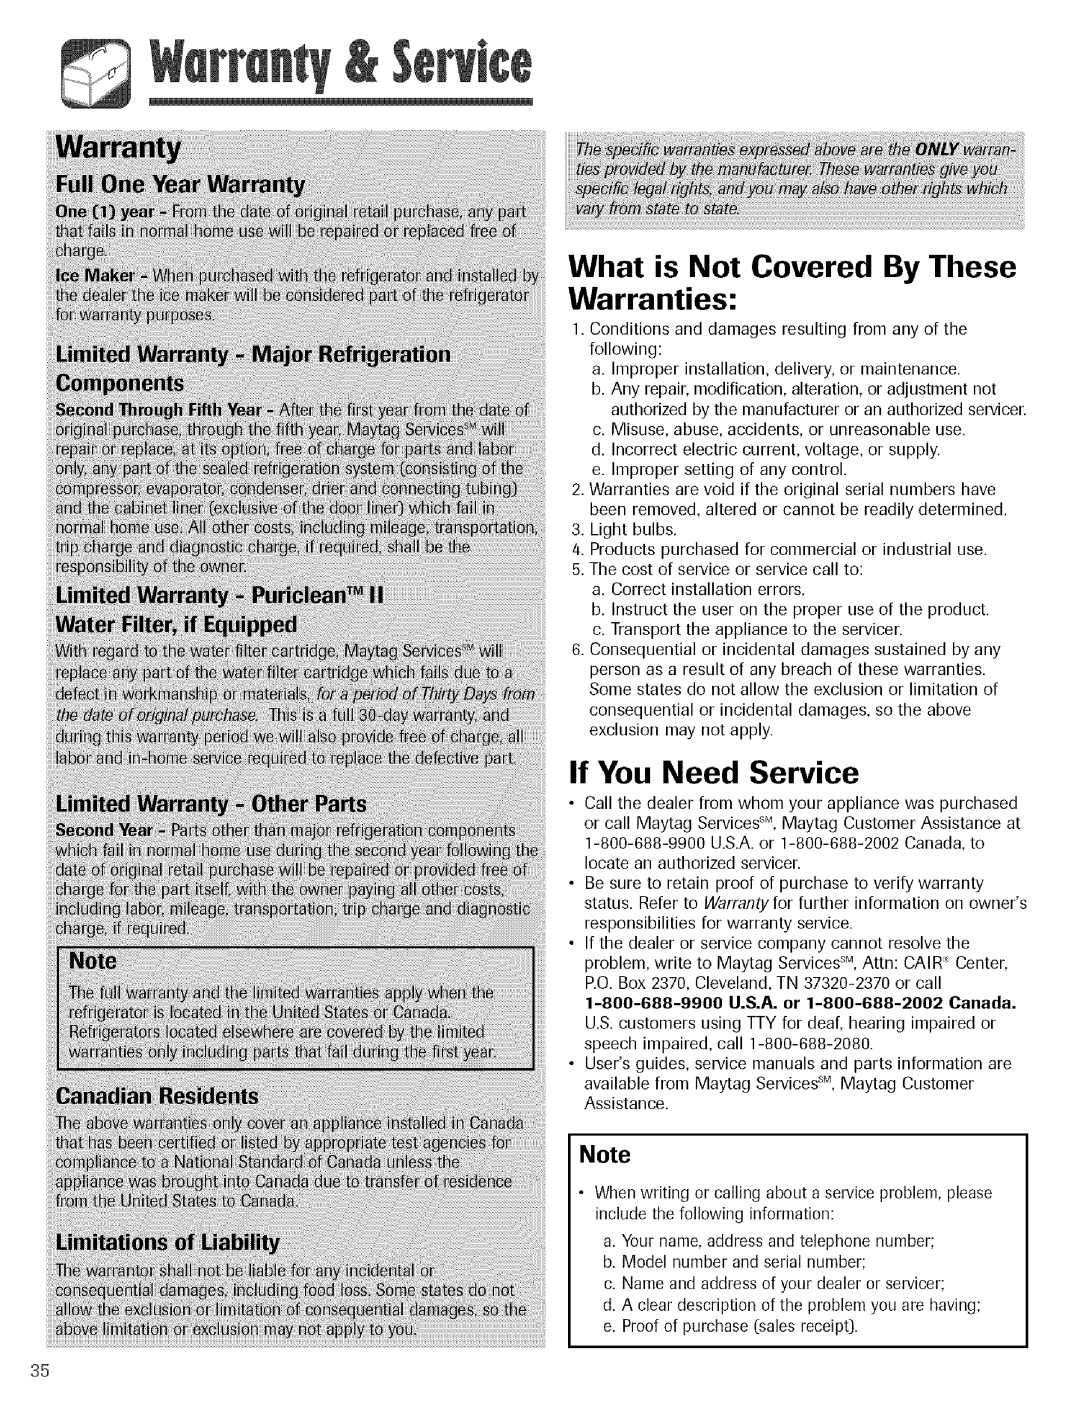 Maytag Refrigerator warranty What is Not Covered By These, If You Need Service, Warranties 